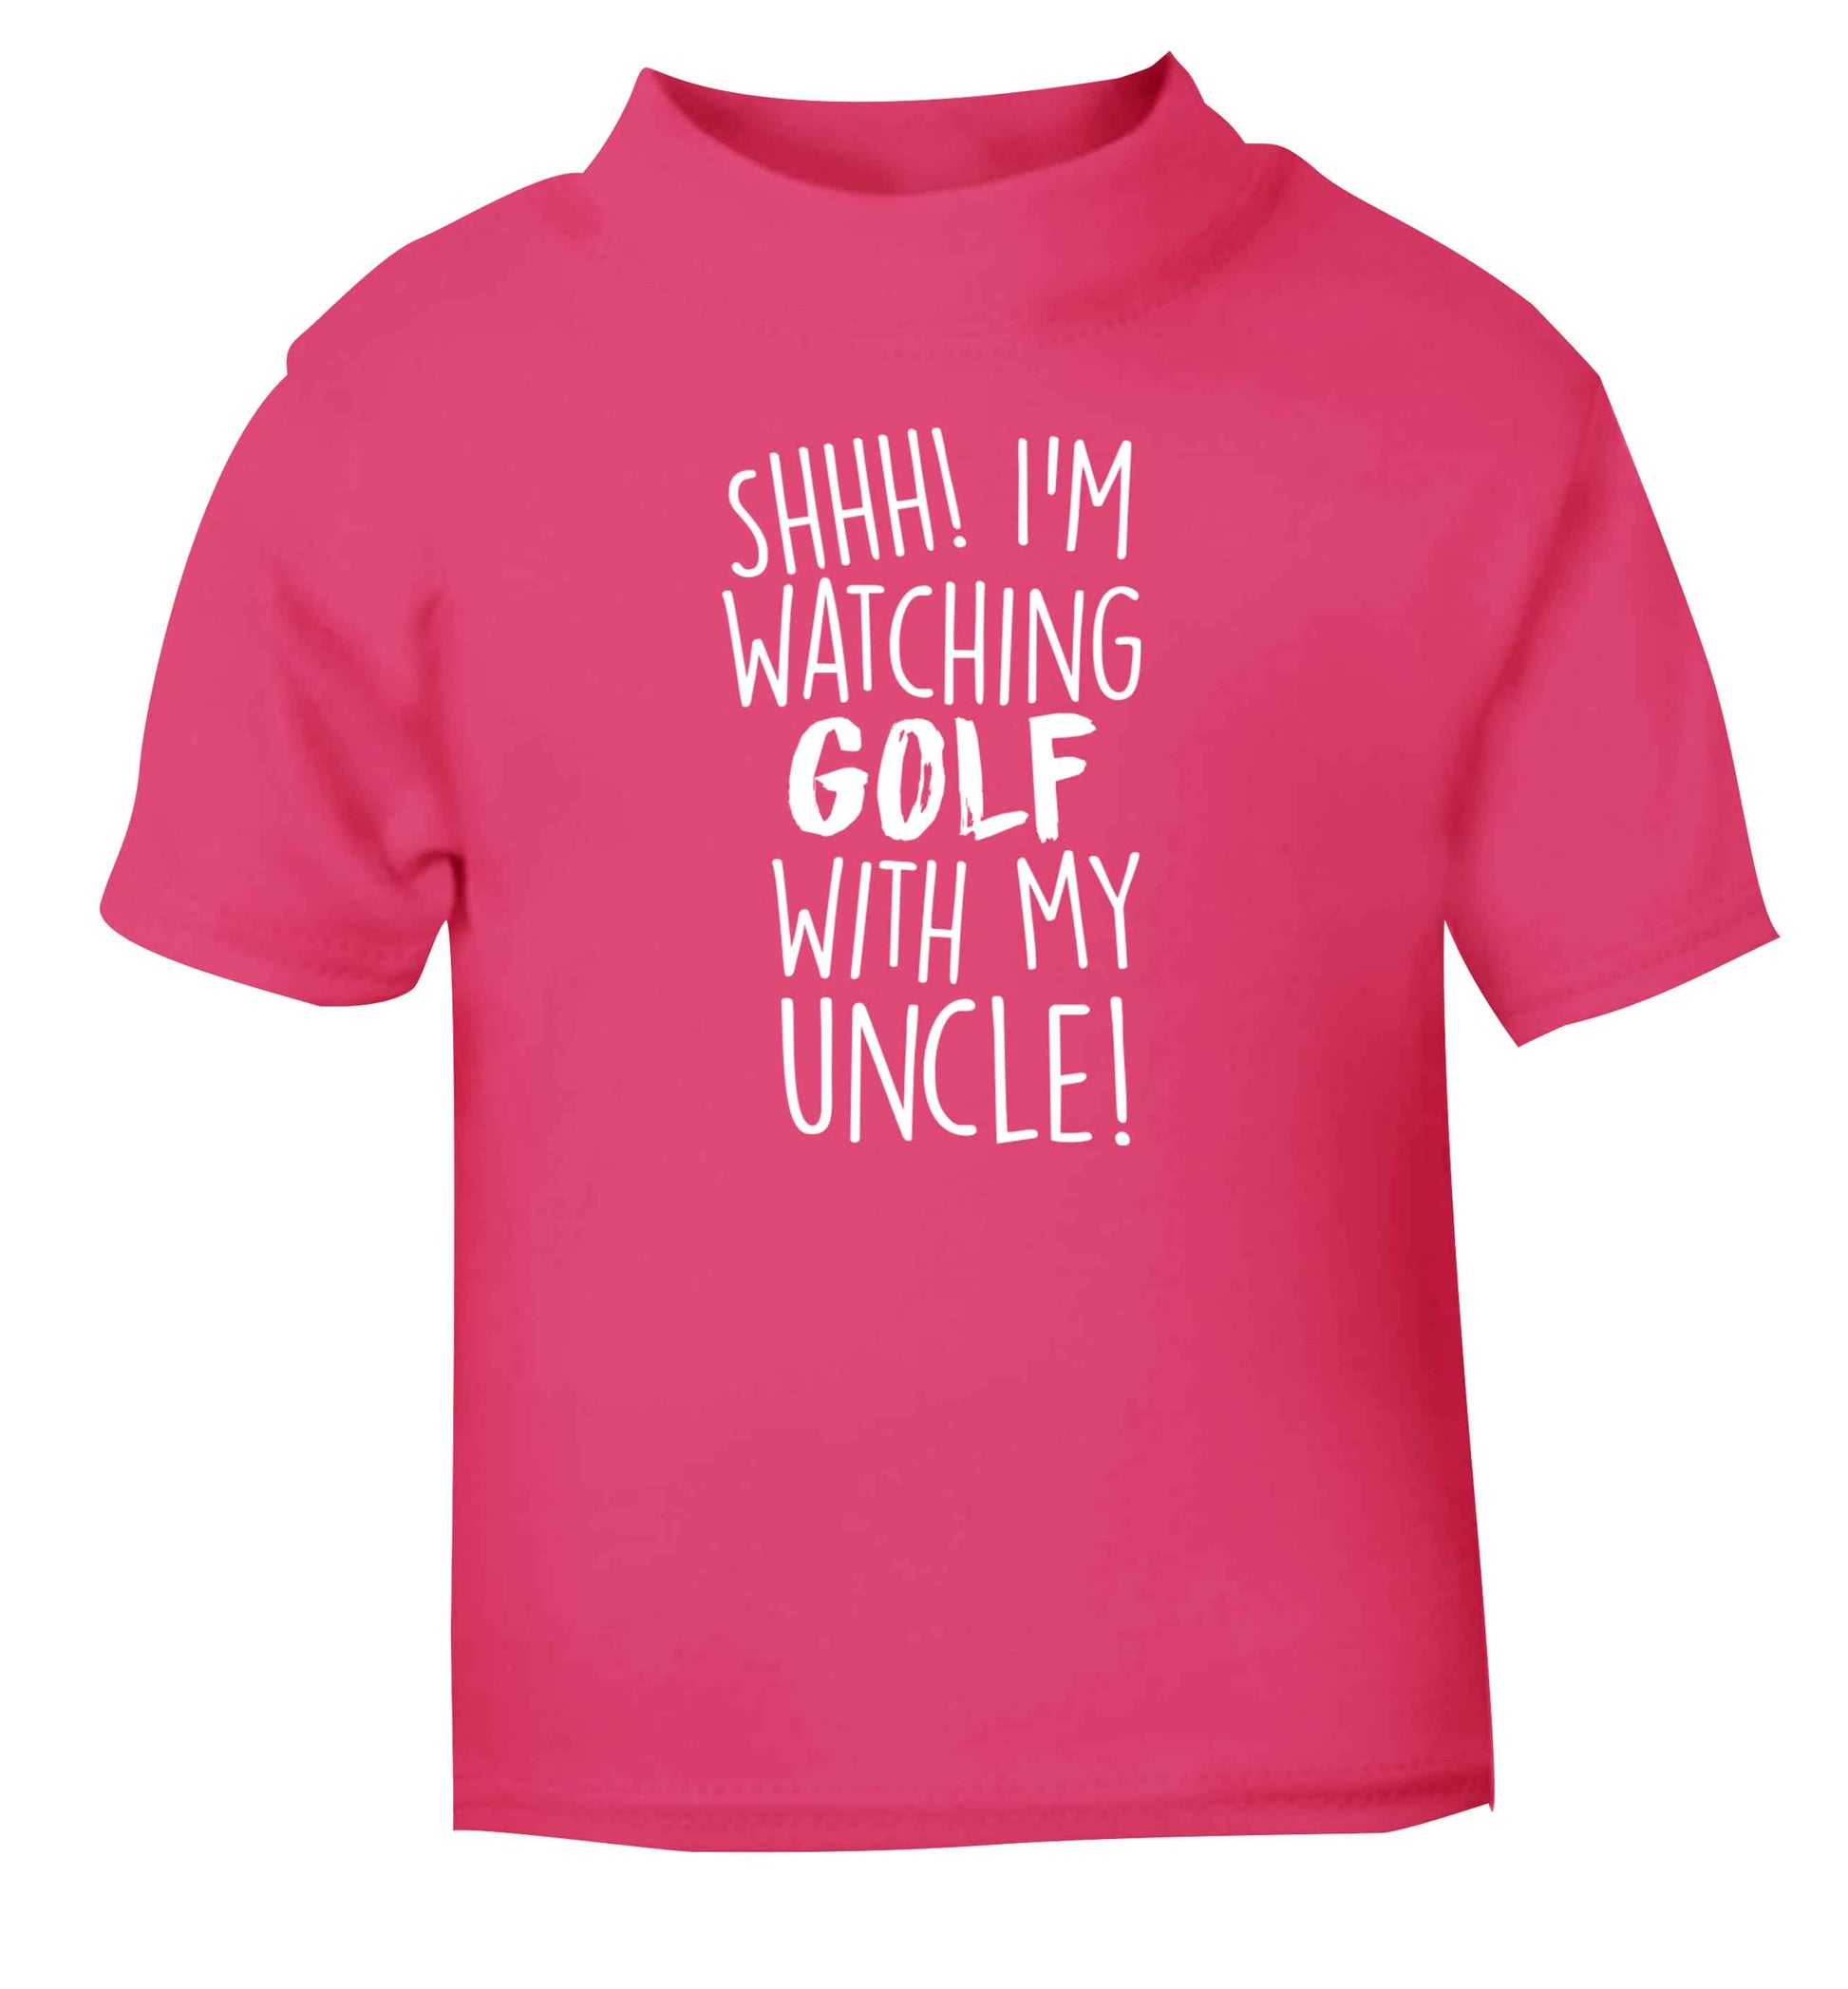 Shh I'm watching golf with my uncle pink Baby Toddler Tshirt 2 Years